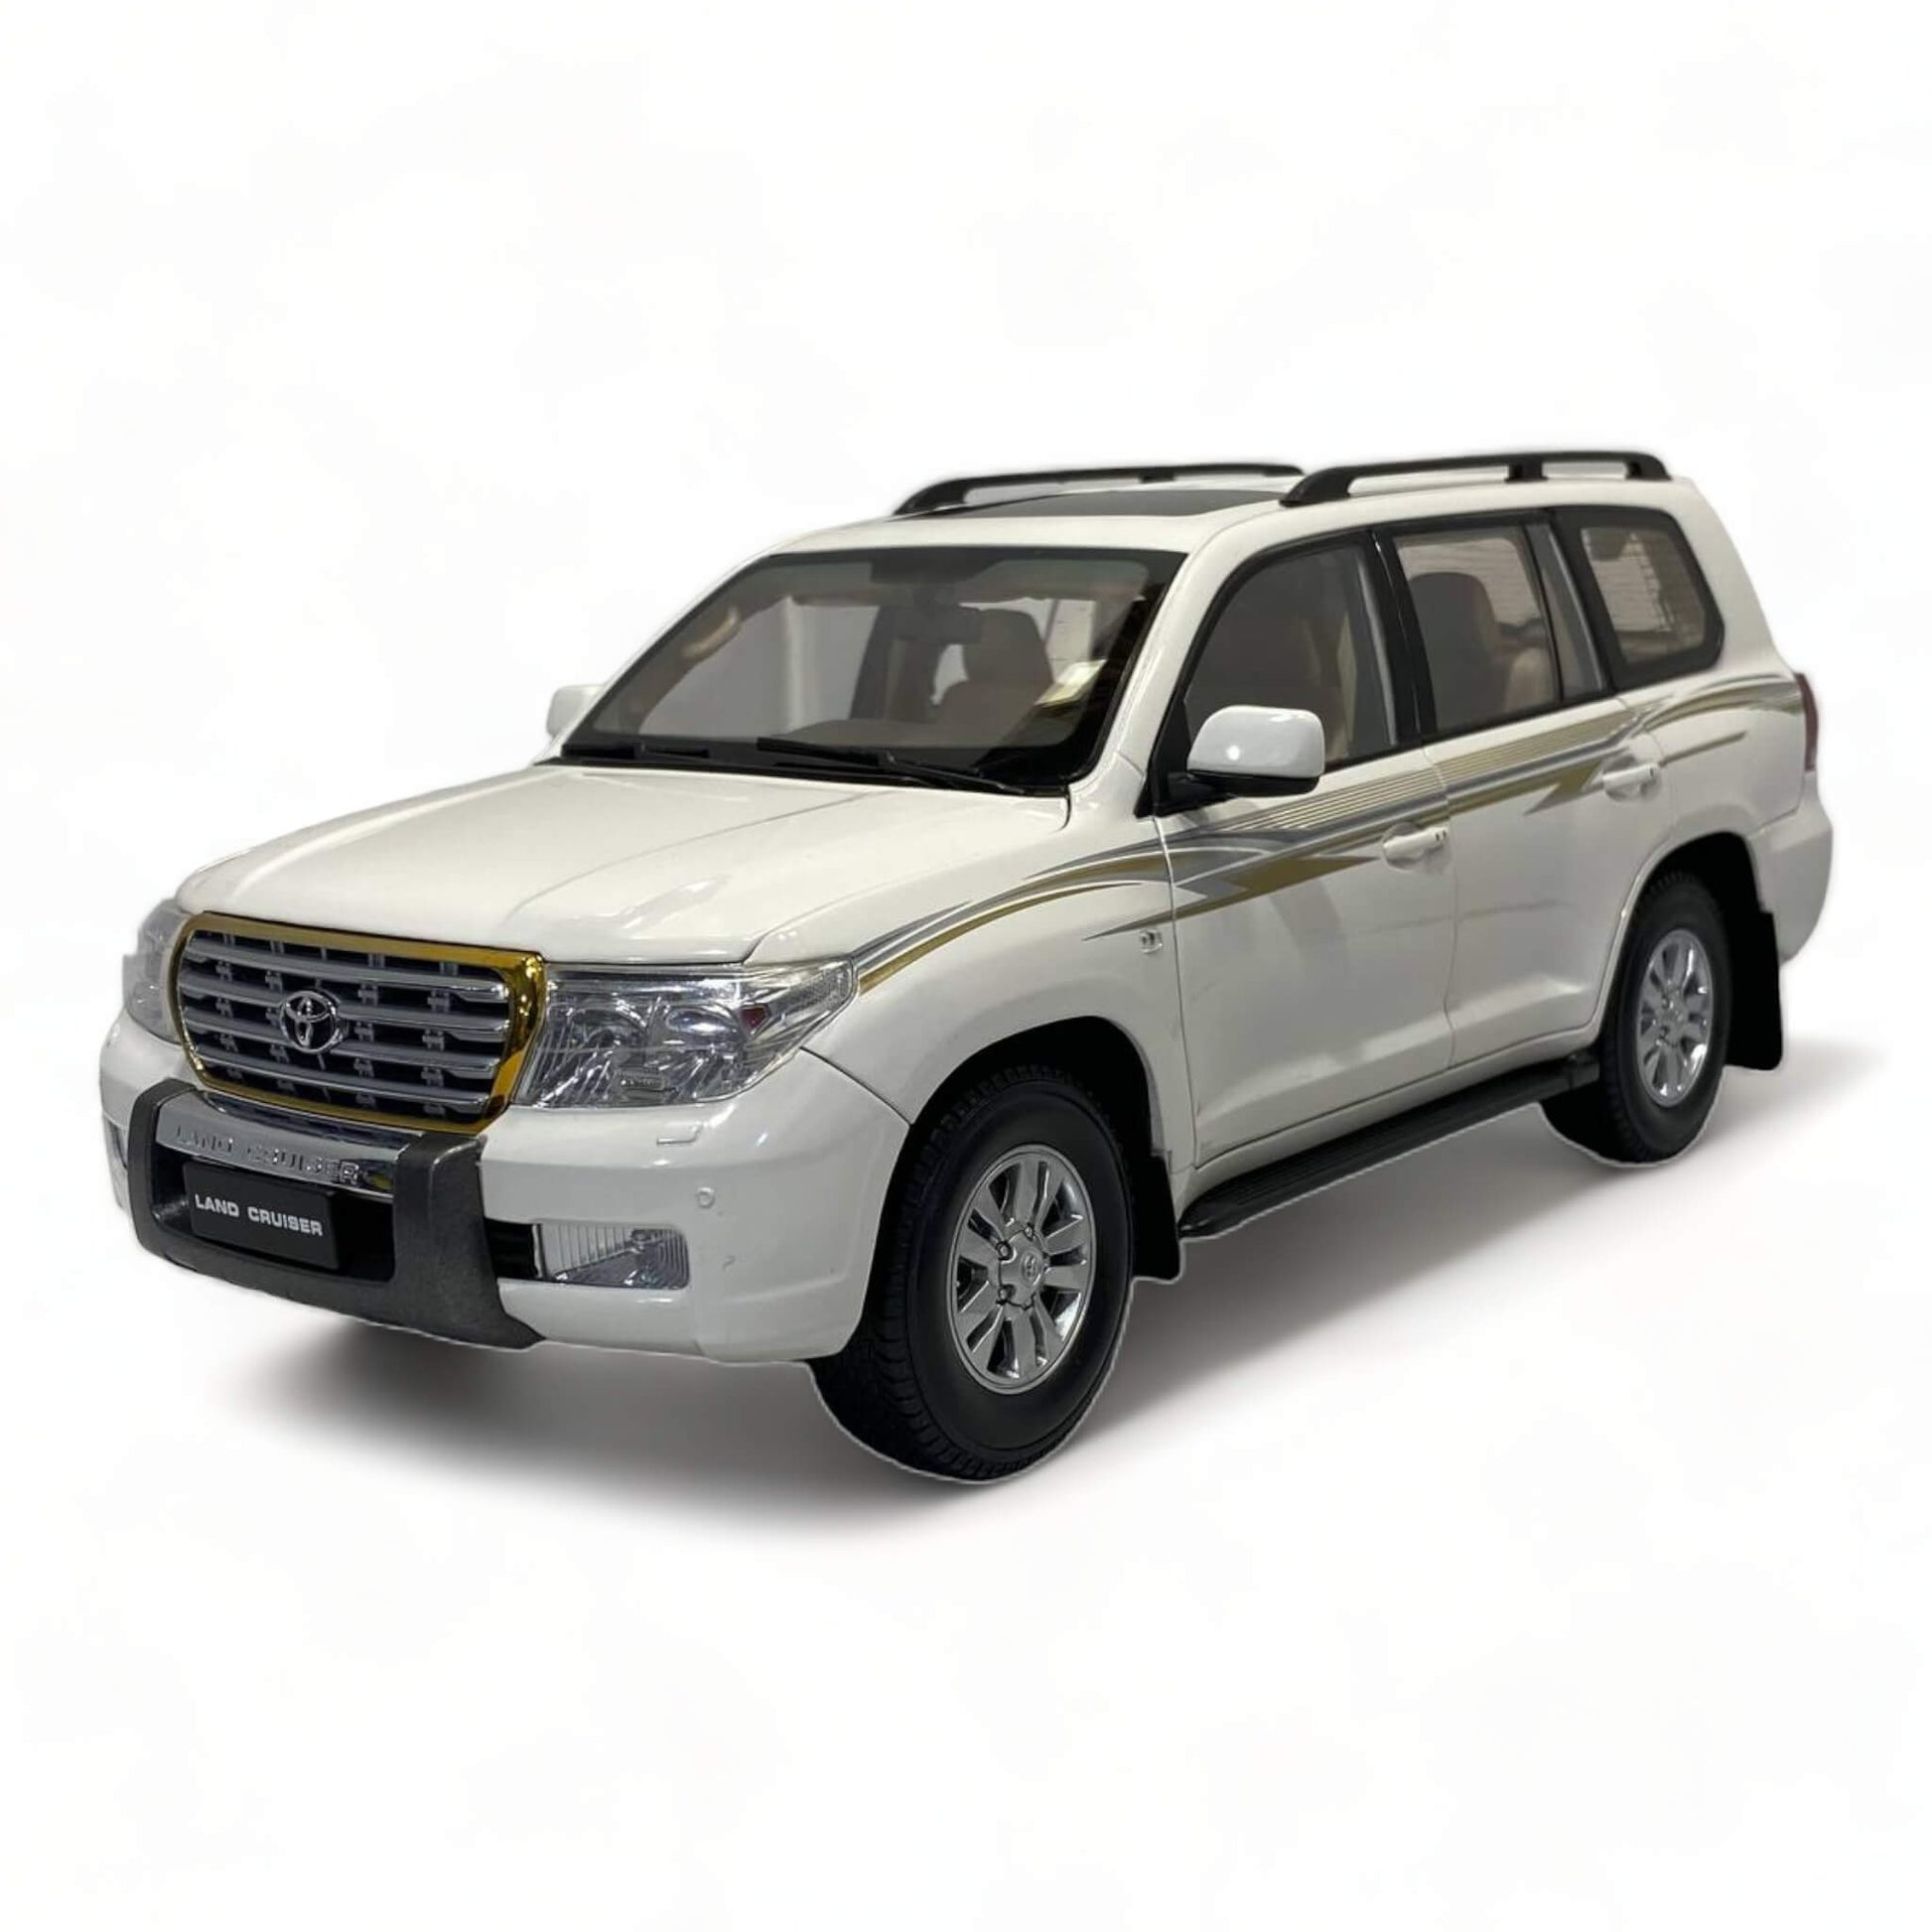 1/18 Diecast Toyota Land Cruiser LC200 Gold Grill White 2008 FAW Toys Scale Model Car|Sold in Dturman.com Dubai UAE.